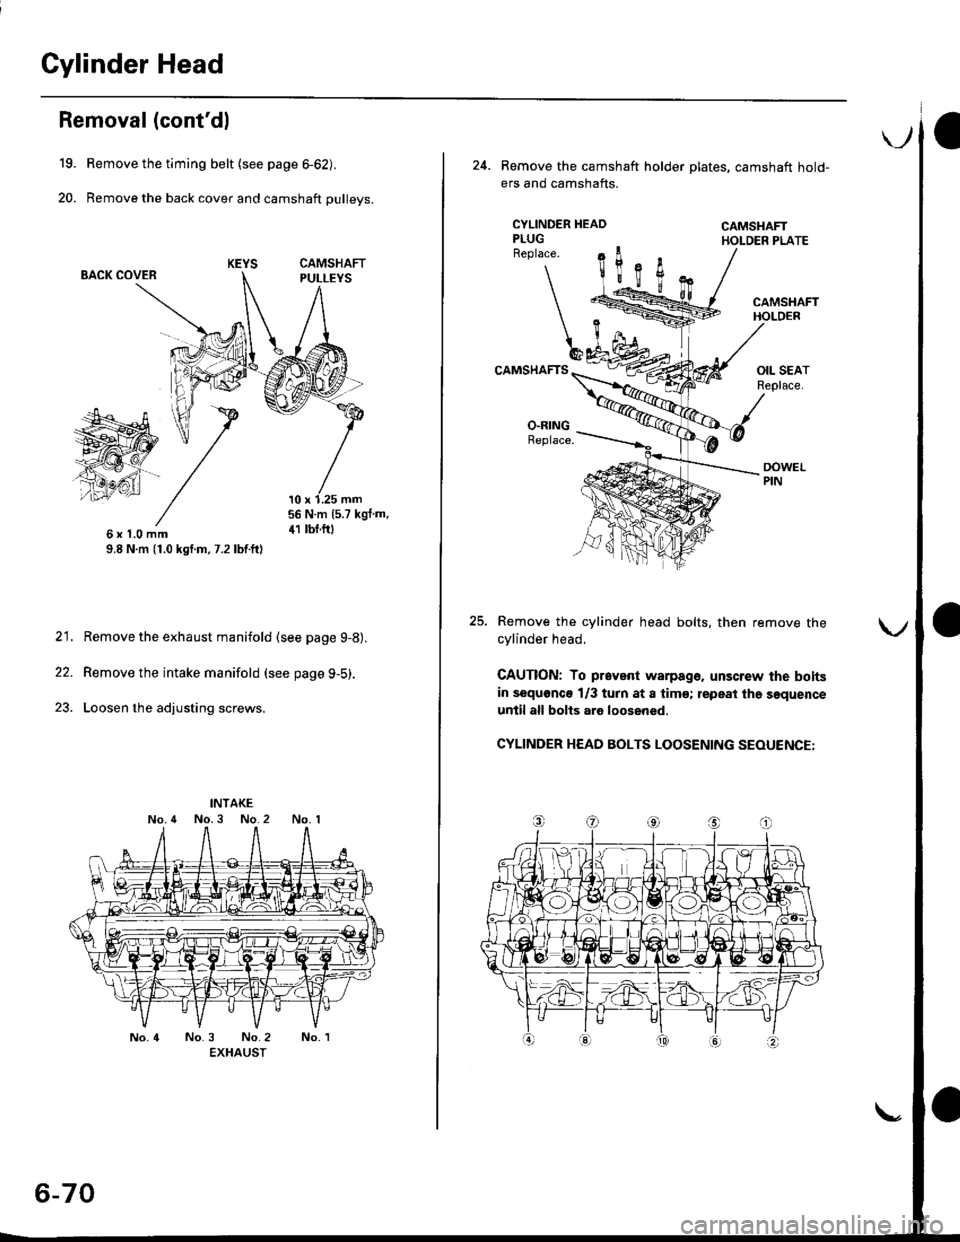 HONDA CIVIC 1999 6.G Workshop Manual Cylinder Head
19.
20.
Removal (contdl
Remove the timing belt {see page 6-62).
Remove the back cover and camshaft pulleys.
BACK COVER
56 N.m (5.7 kgf m,
41 tbt.f06xl.0mm9.8 N,m (1.0 kgf.m, 7.2 lbf.ft)